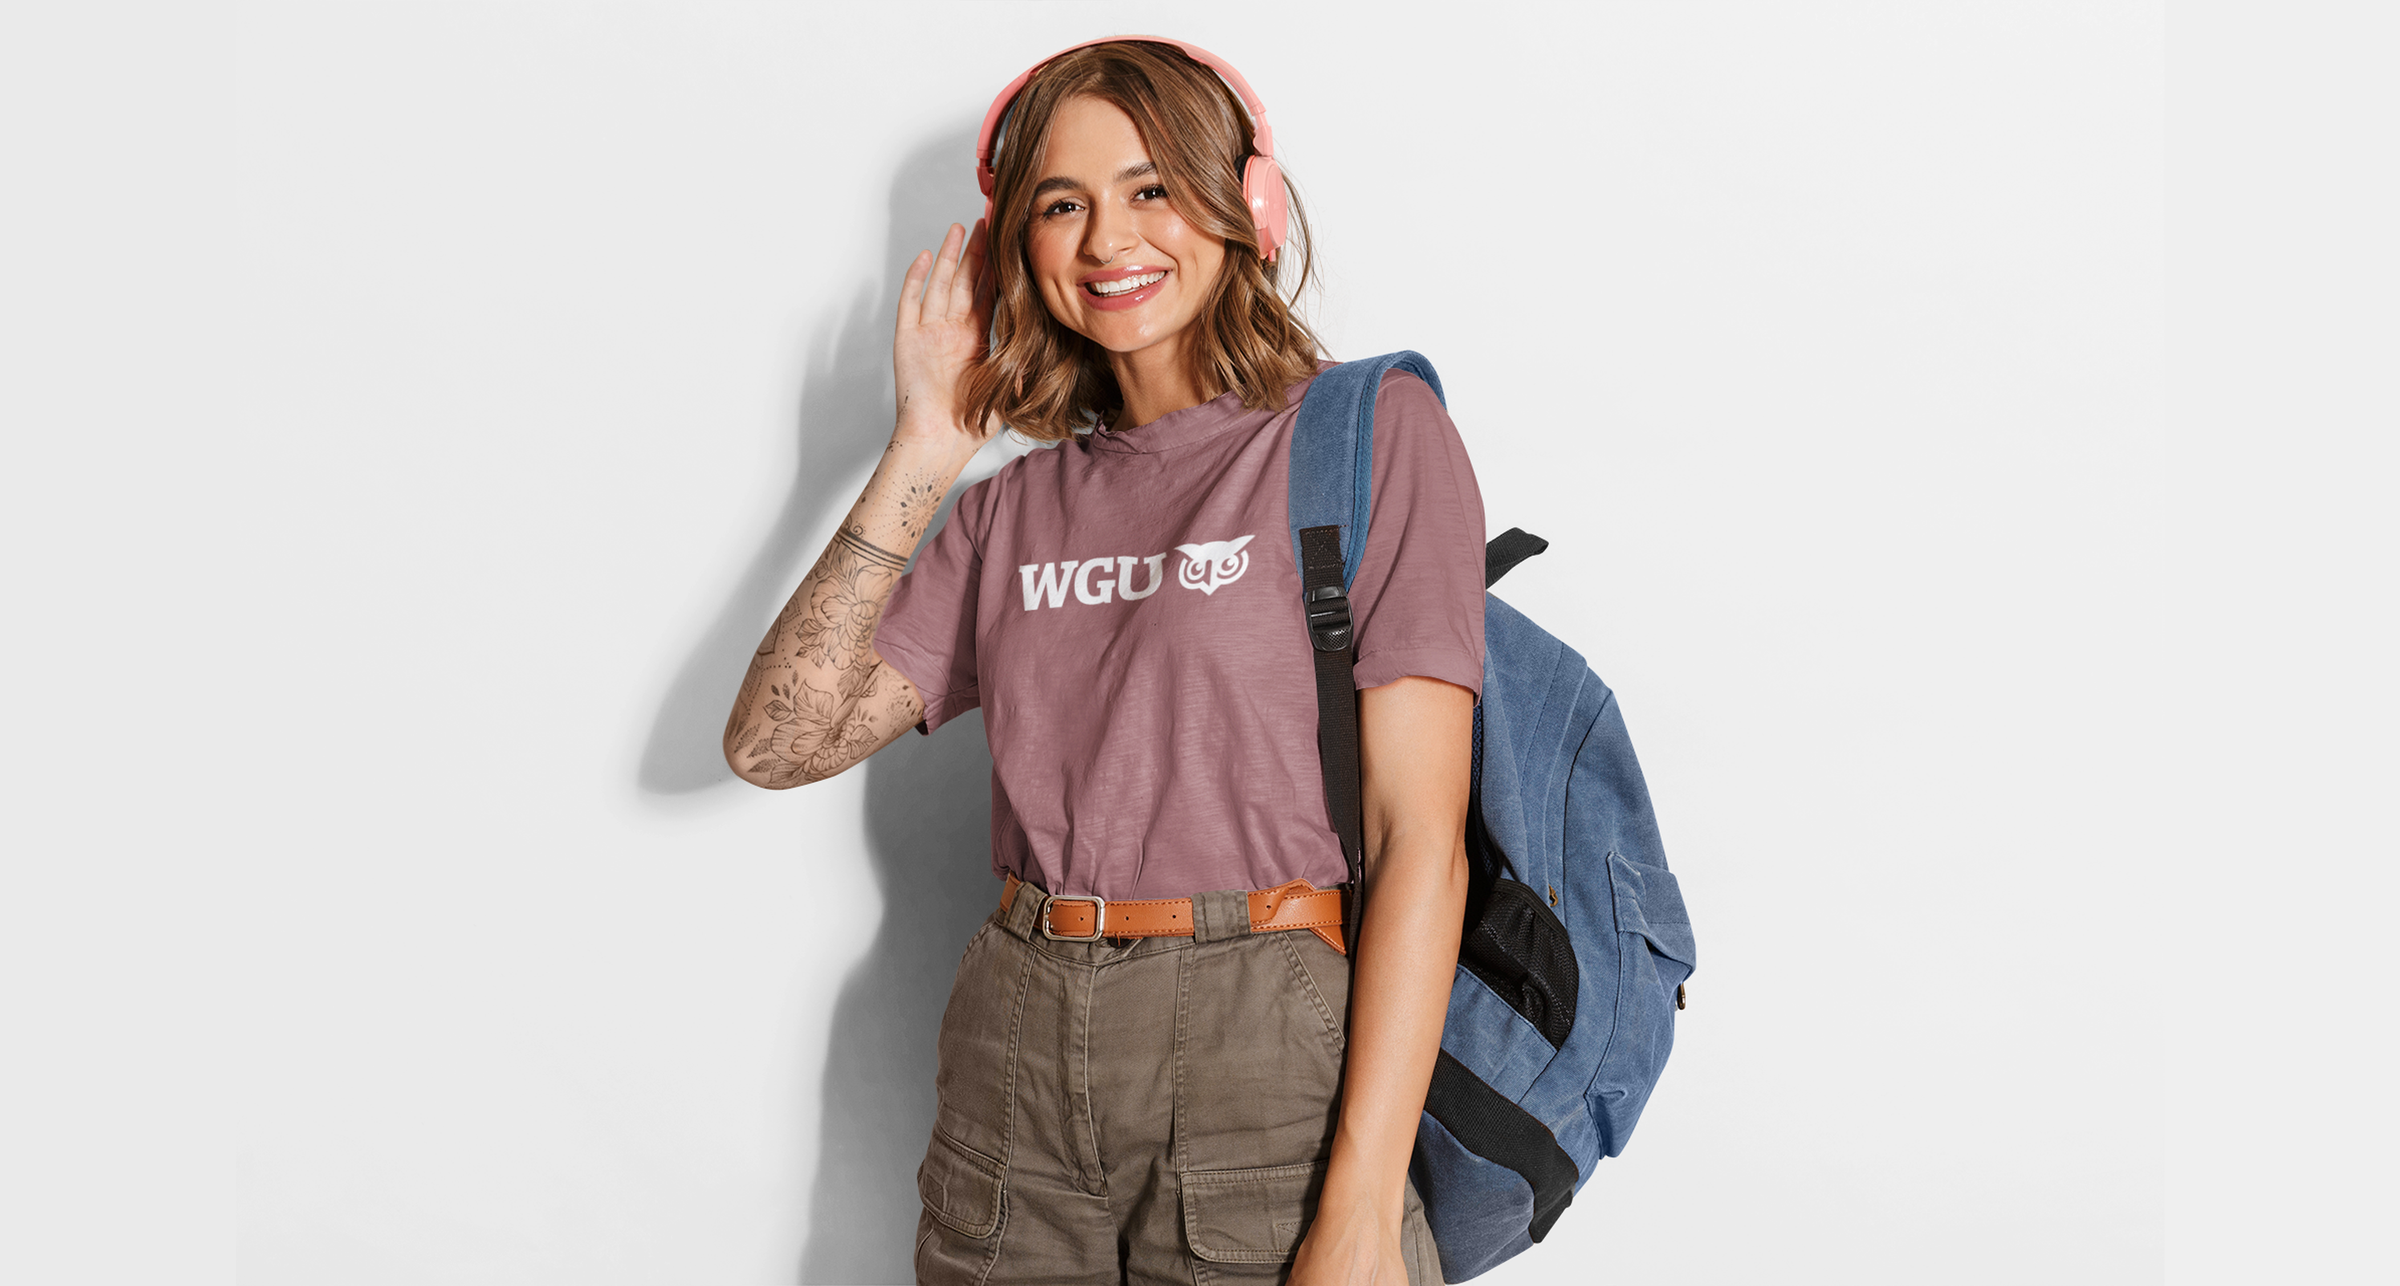 Girl in mauve shirt with WGU decoration wearing a blue backpack and pink headphones in front of cream background